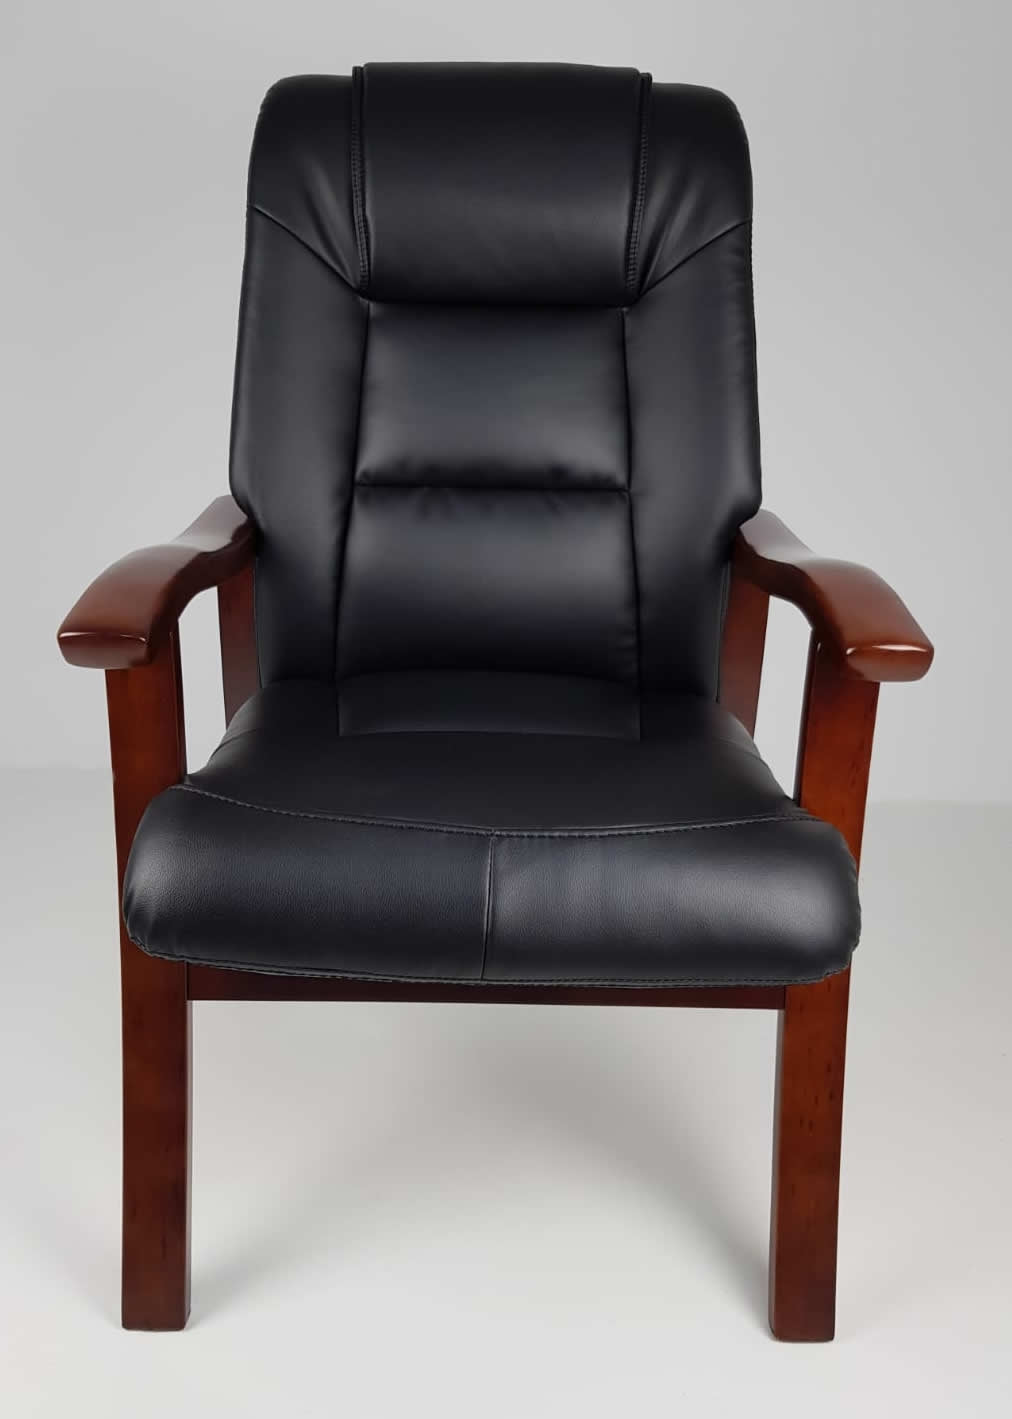 Visitor Chair Black Leather with Walnut Arms - CHA-1830C